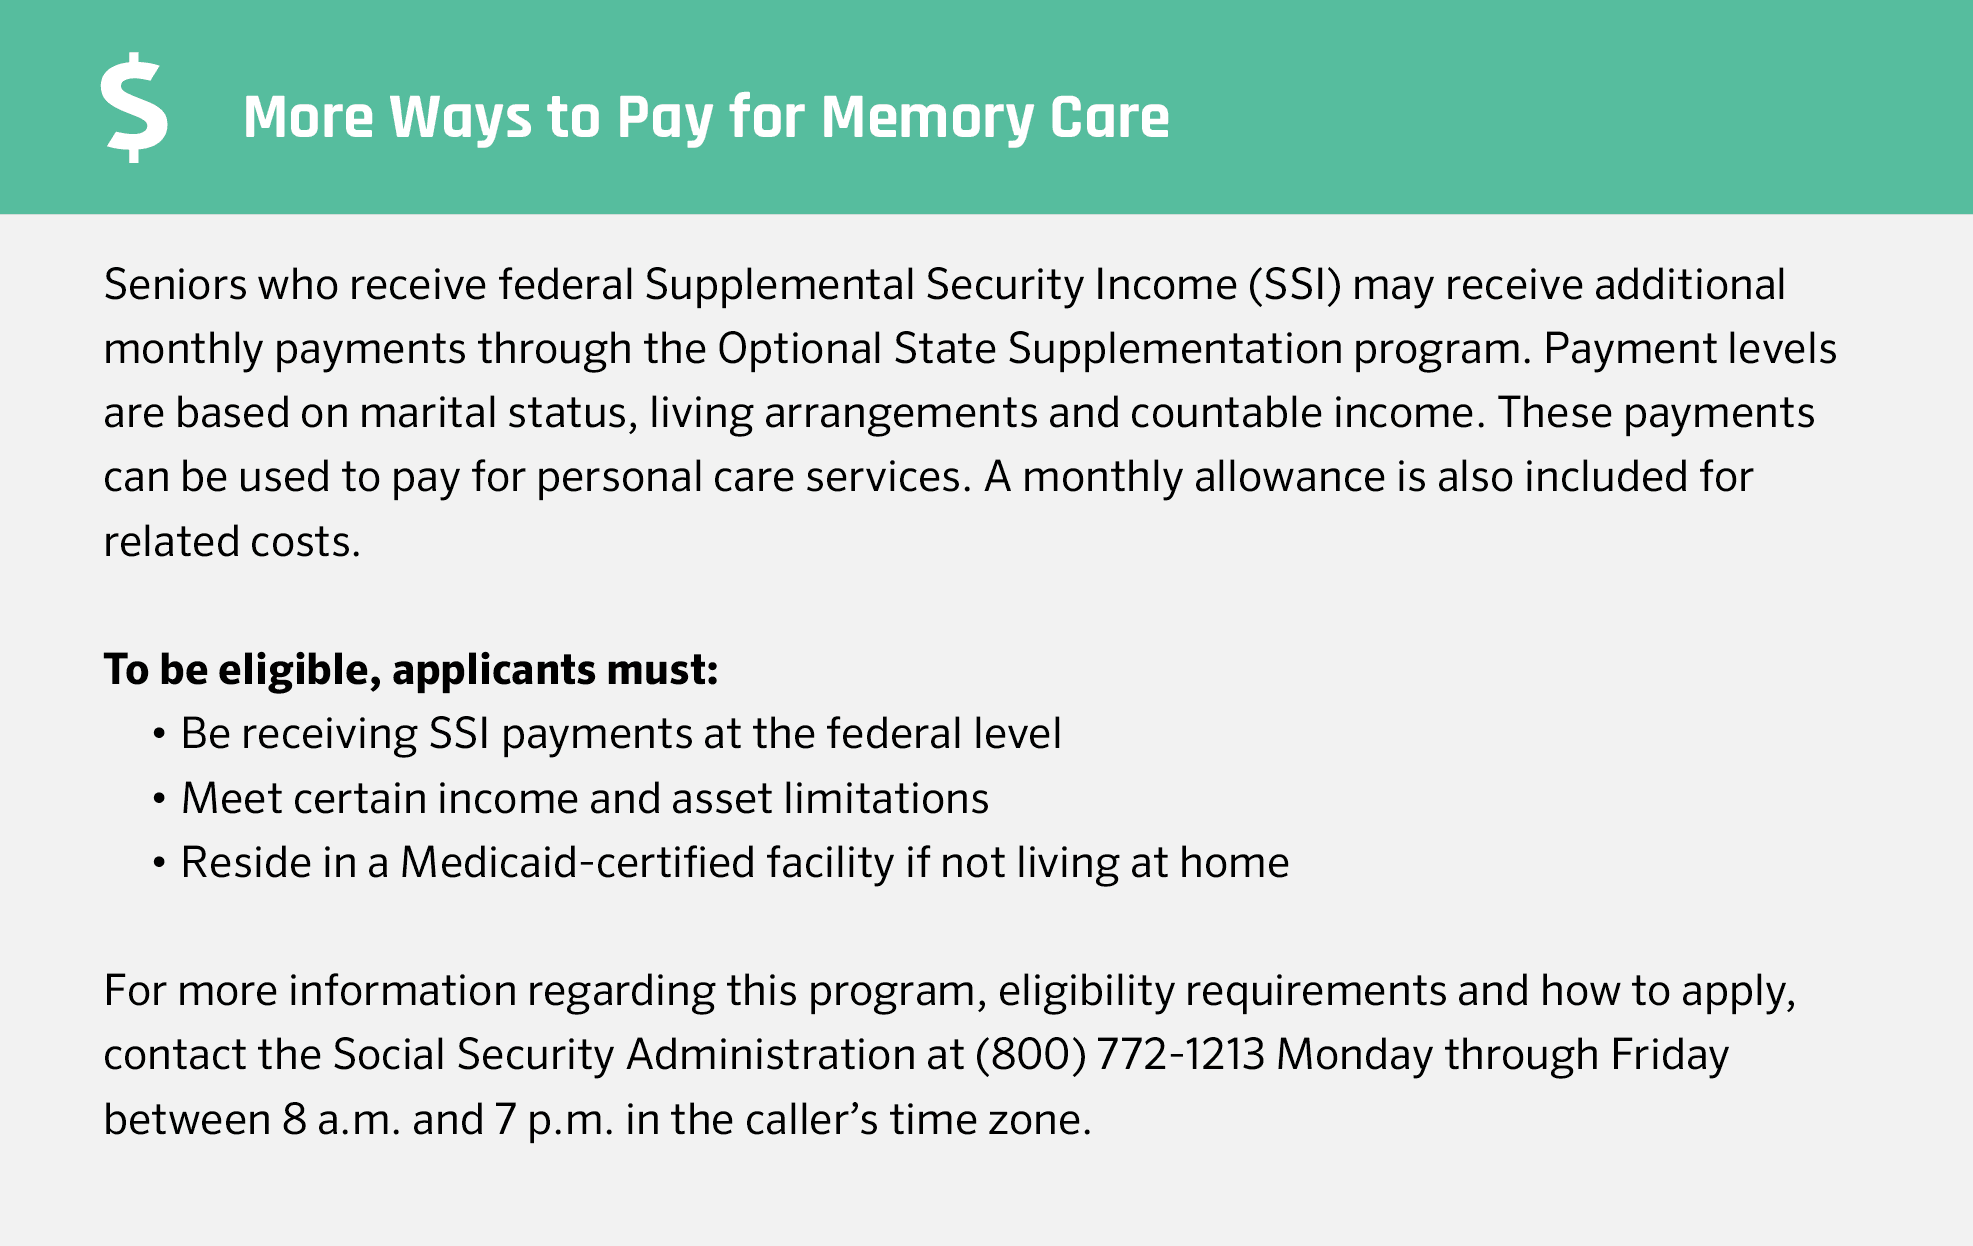 More ways to pay for memory care in Michigan